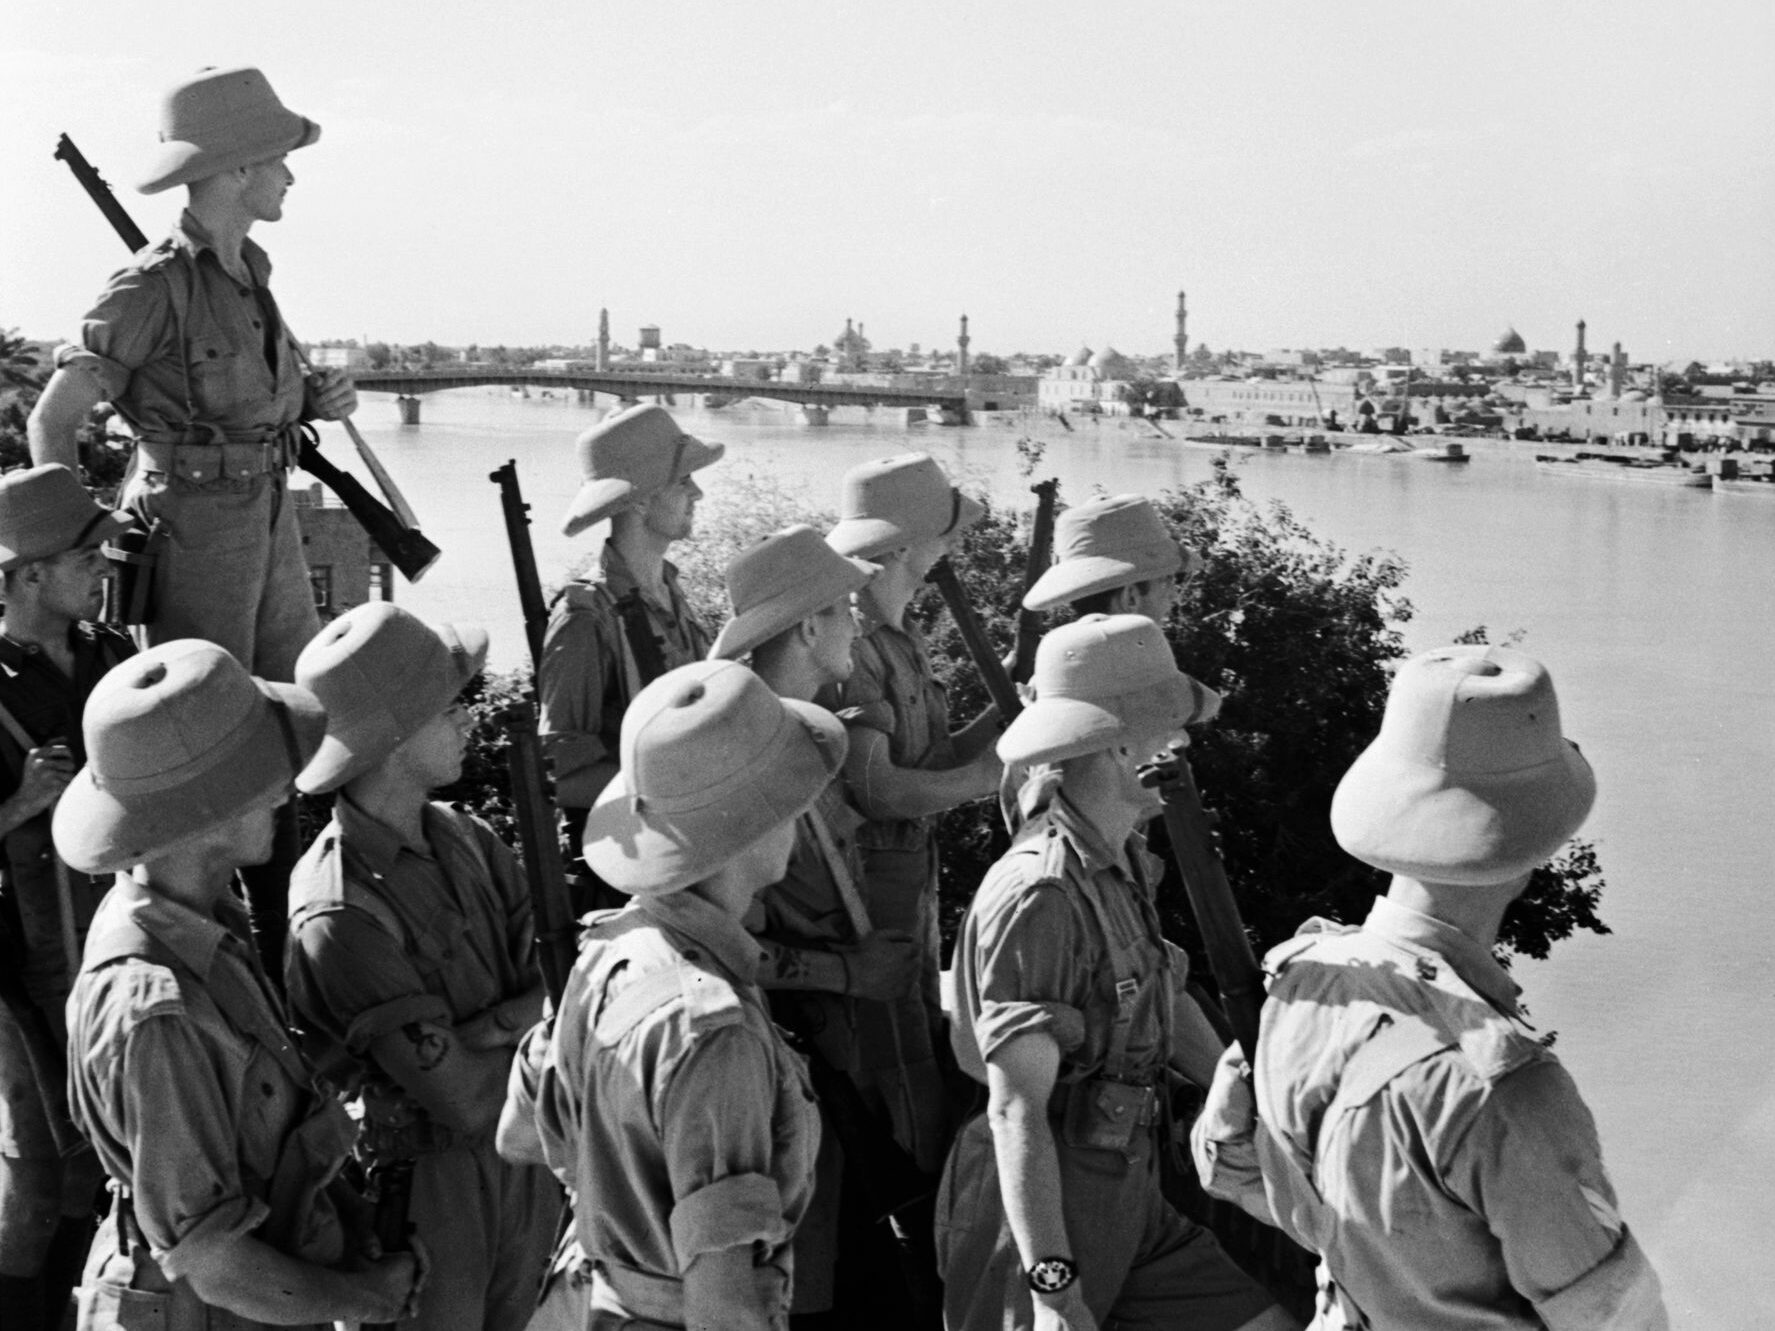 Armed with Enfield rifles, British troops view Baghdad from across the Tigris River, June 1941.